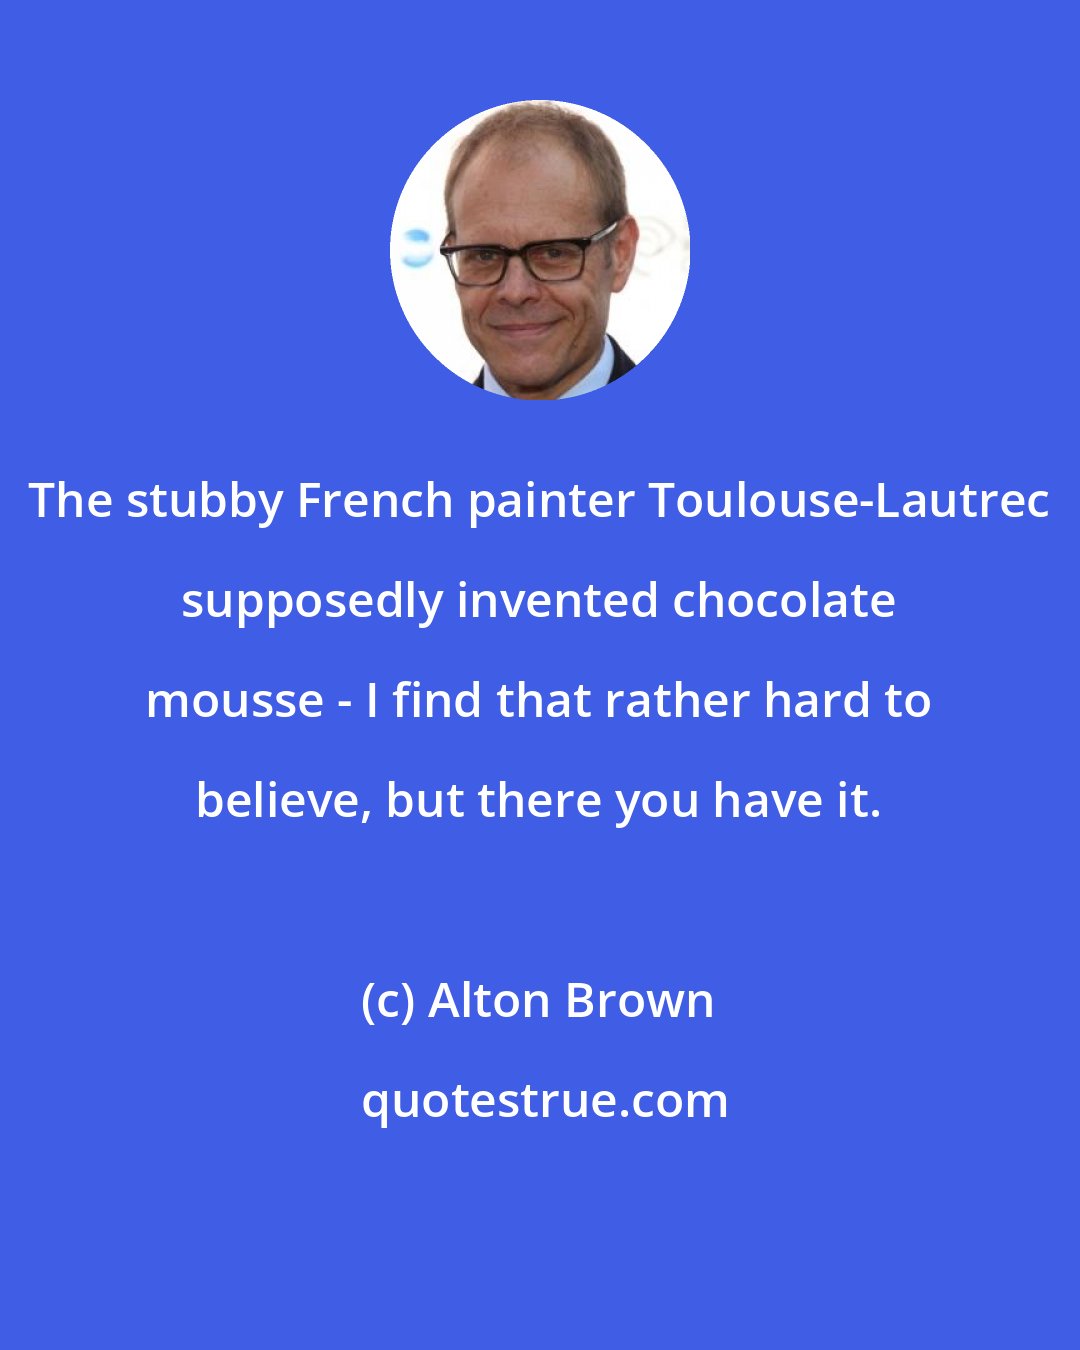 Alton Brown: The stubby French painter Toulouse-Lautrec supposedly invented chocolate mousse - I find that rather hard to believe, but there you have it.